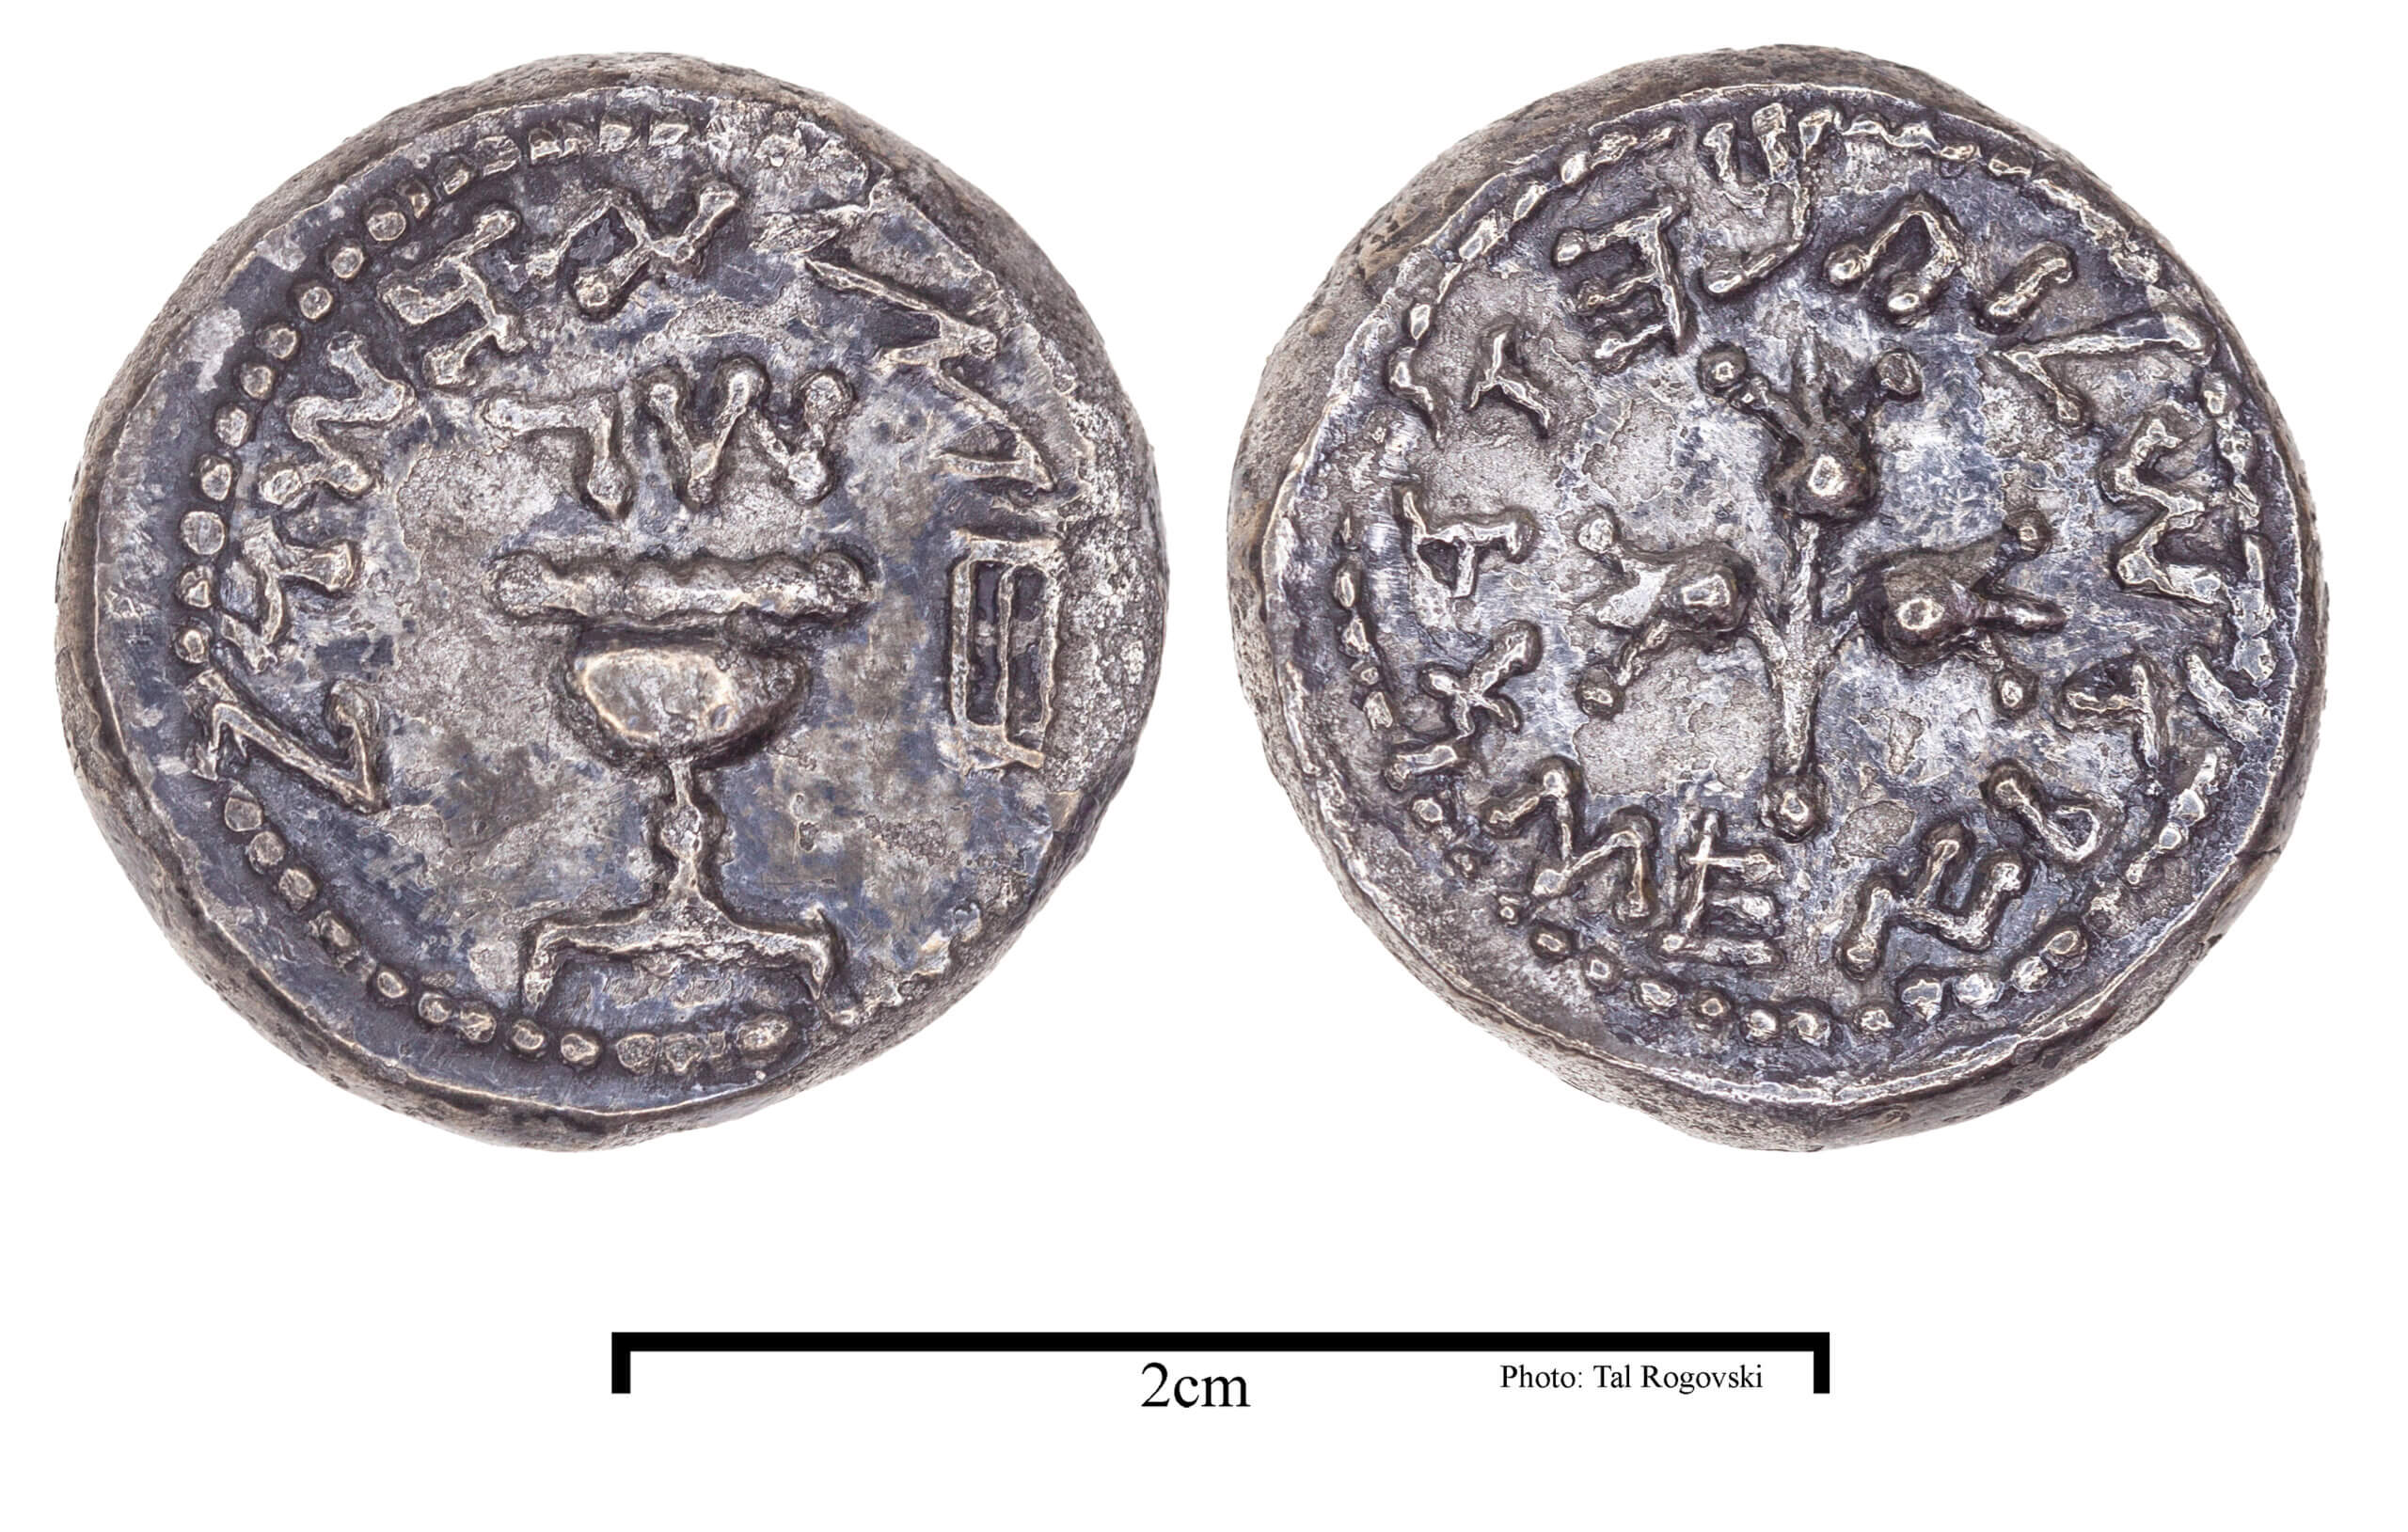 The half shekel coin of the third year of the Great Revolt (Photo: Tal Rogovsky)